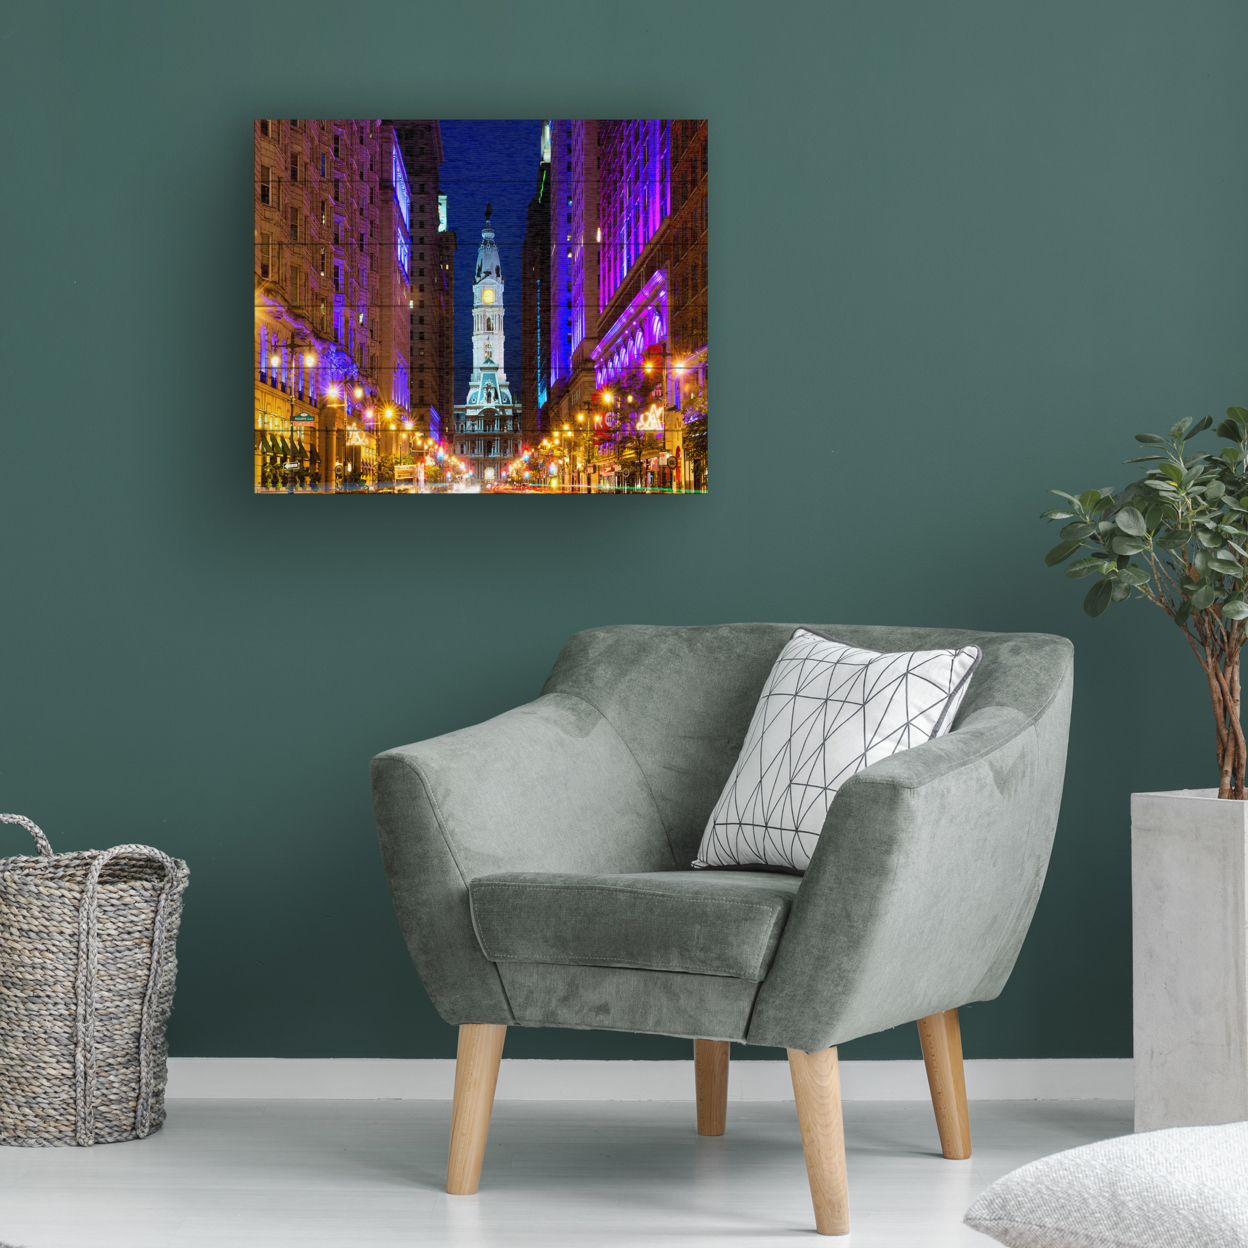 Wooden Slat Art 18 X 22 Inches Titled City Hall Philadelphia Ready To Hang Home Decor Picture